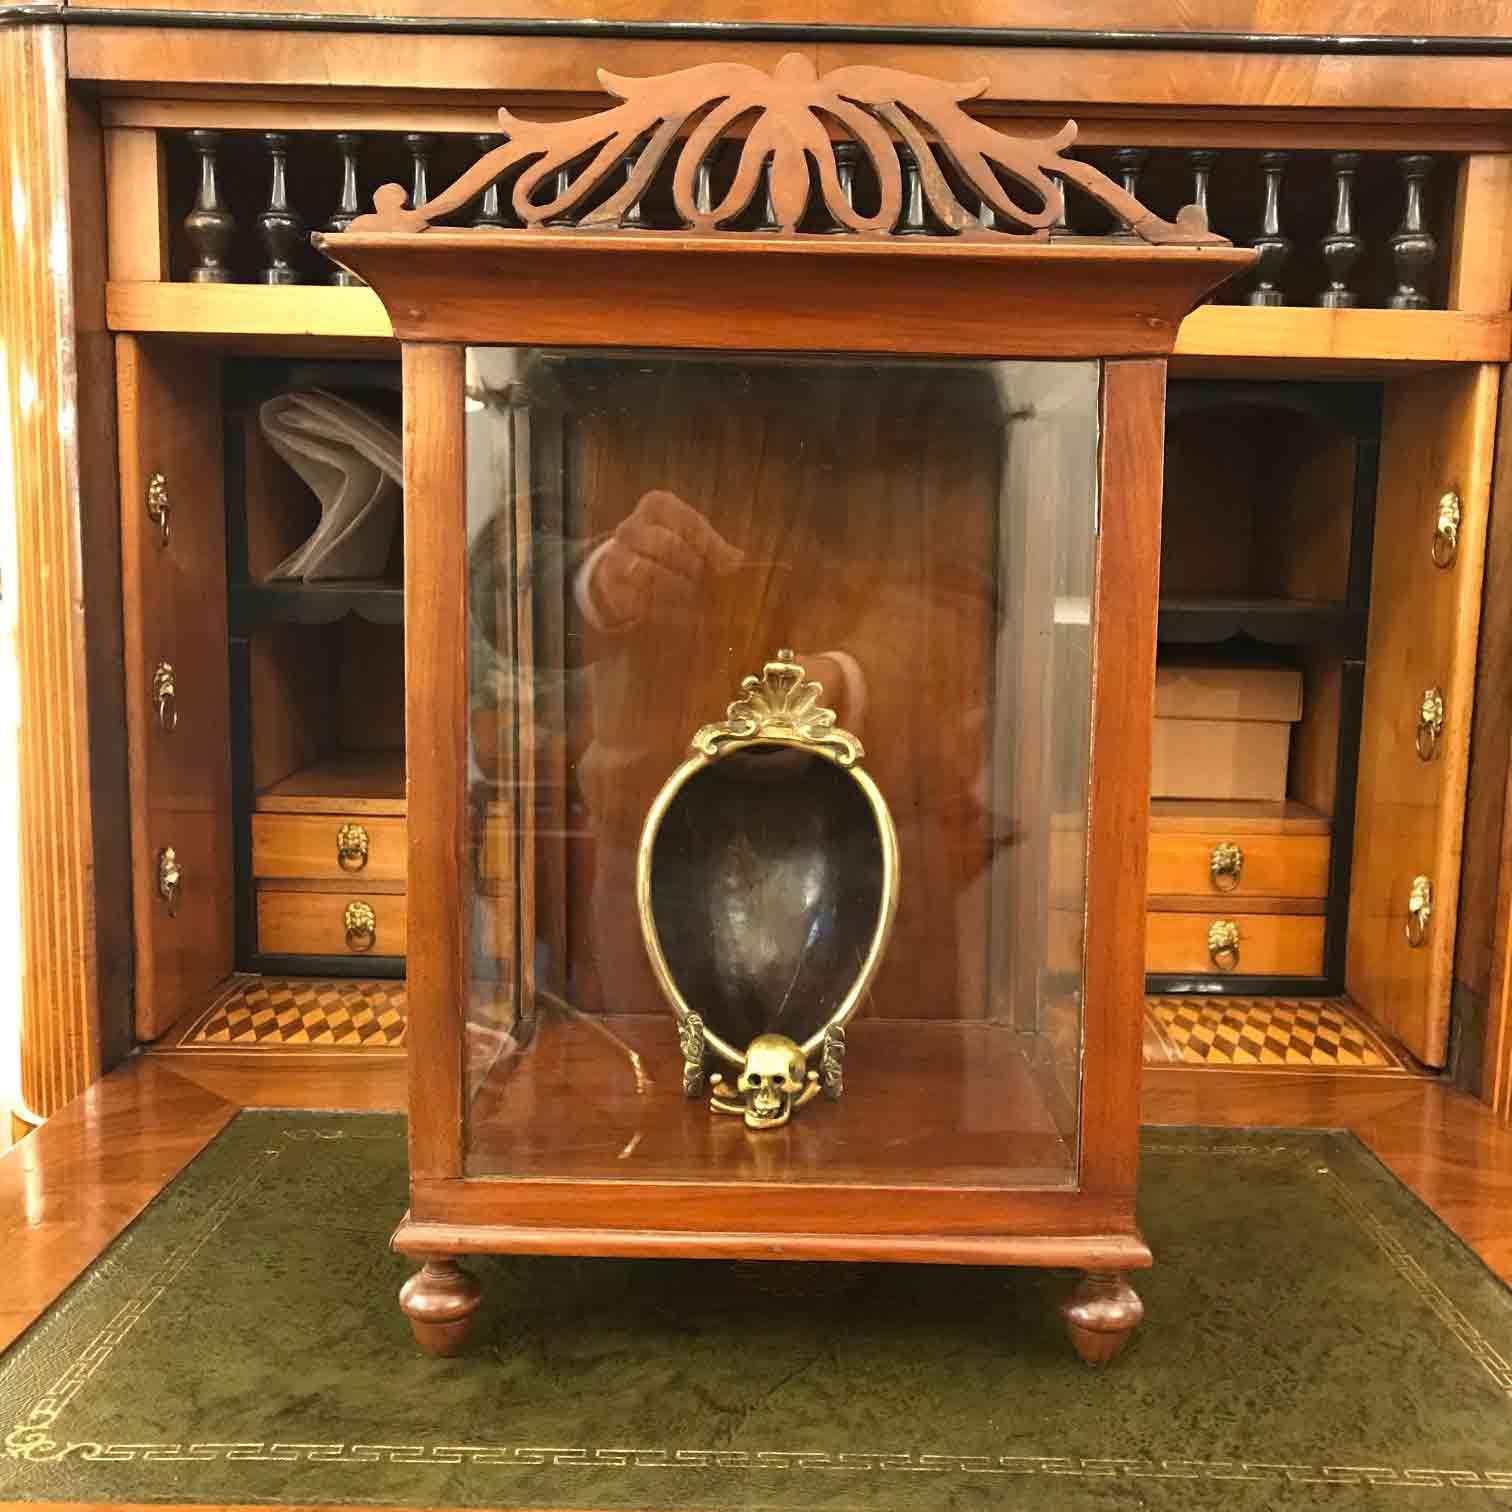 Early 19th century Italian glazed walnut tabletop, a display cabinet, theca from Arezzo, Italy, Tuscany region.
Sliding opening of the back walnut panel, this rare tabletop theca stands on four turned feet, has a walnut moulding frame throughout,